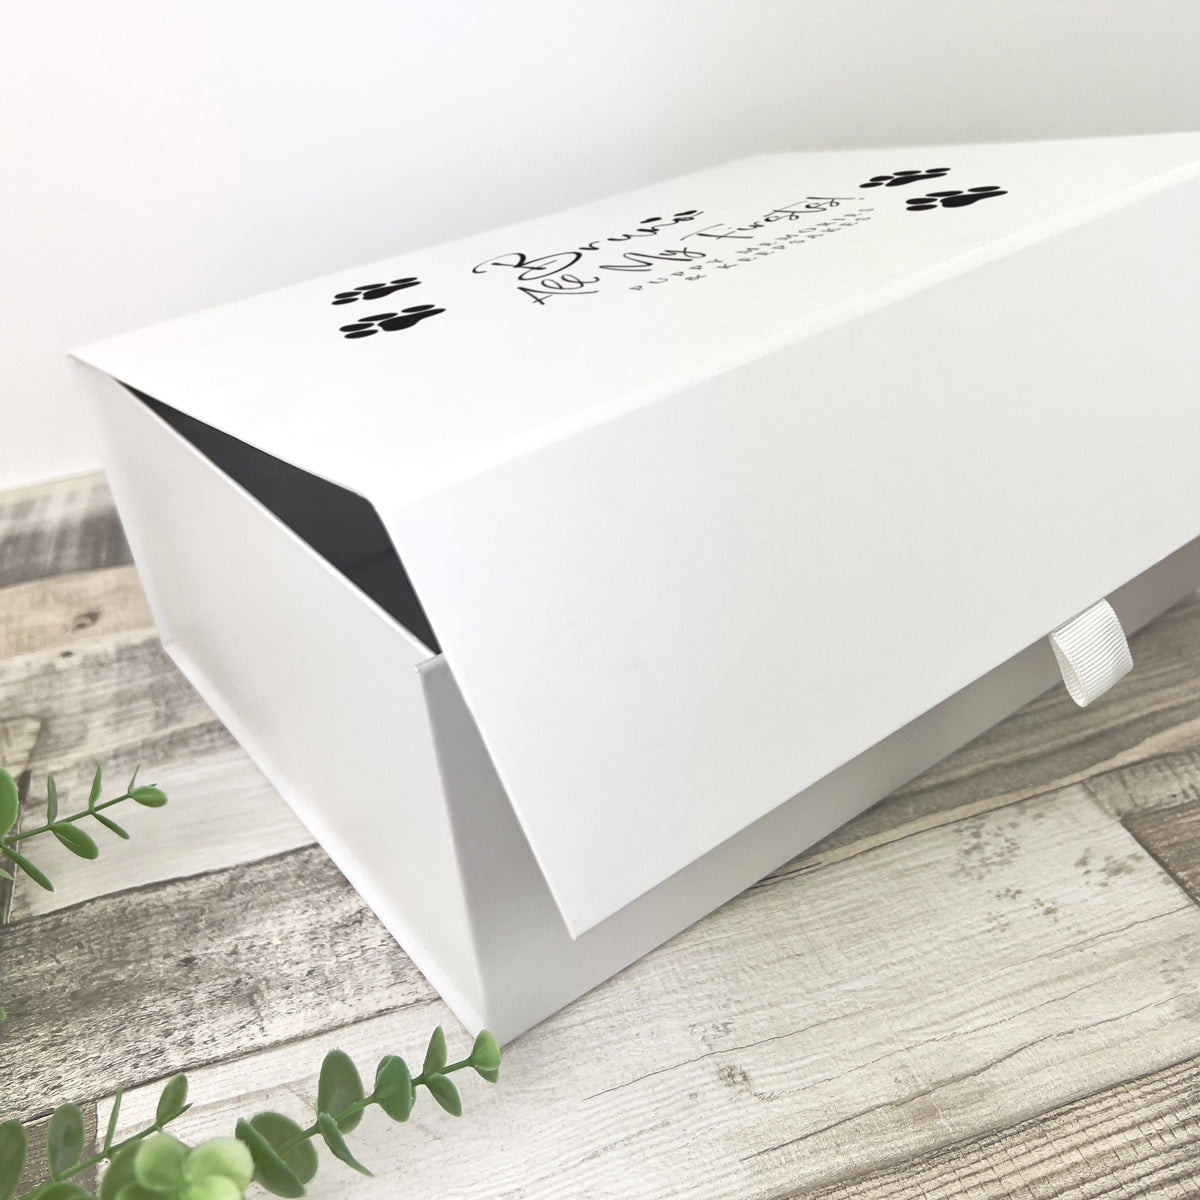 Personalised All My Firsts Puppy / Kitten Memory Box